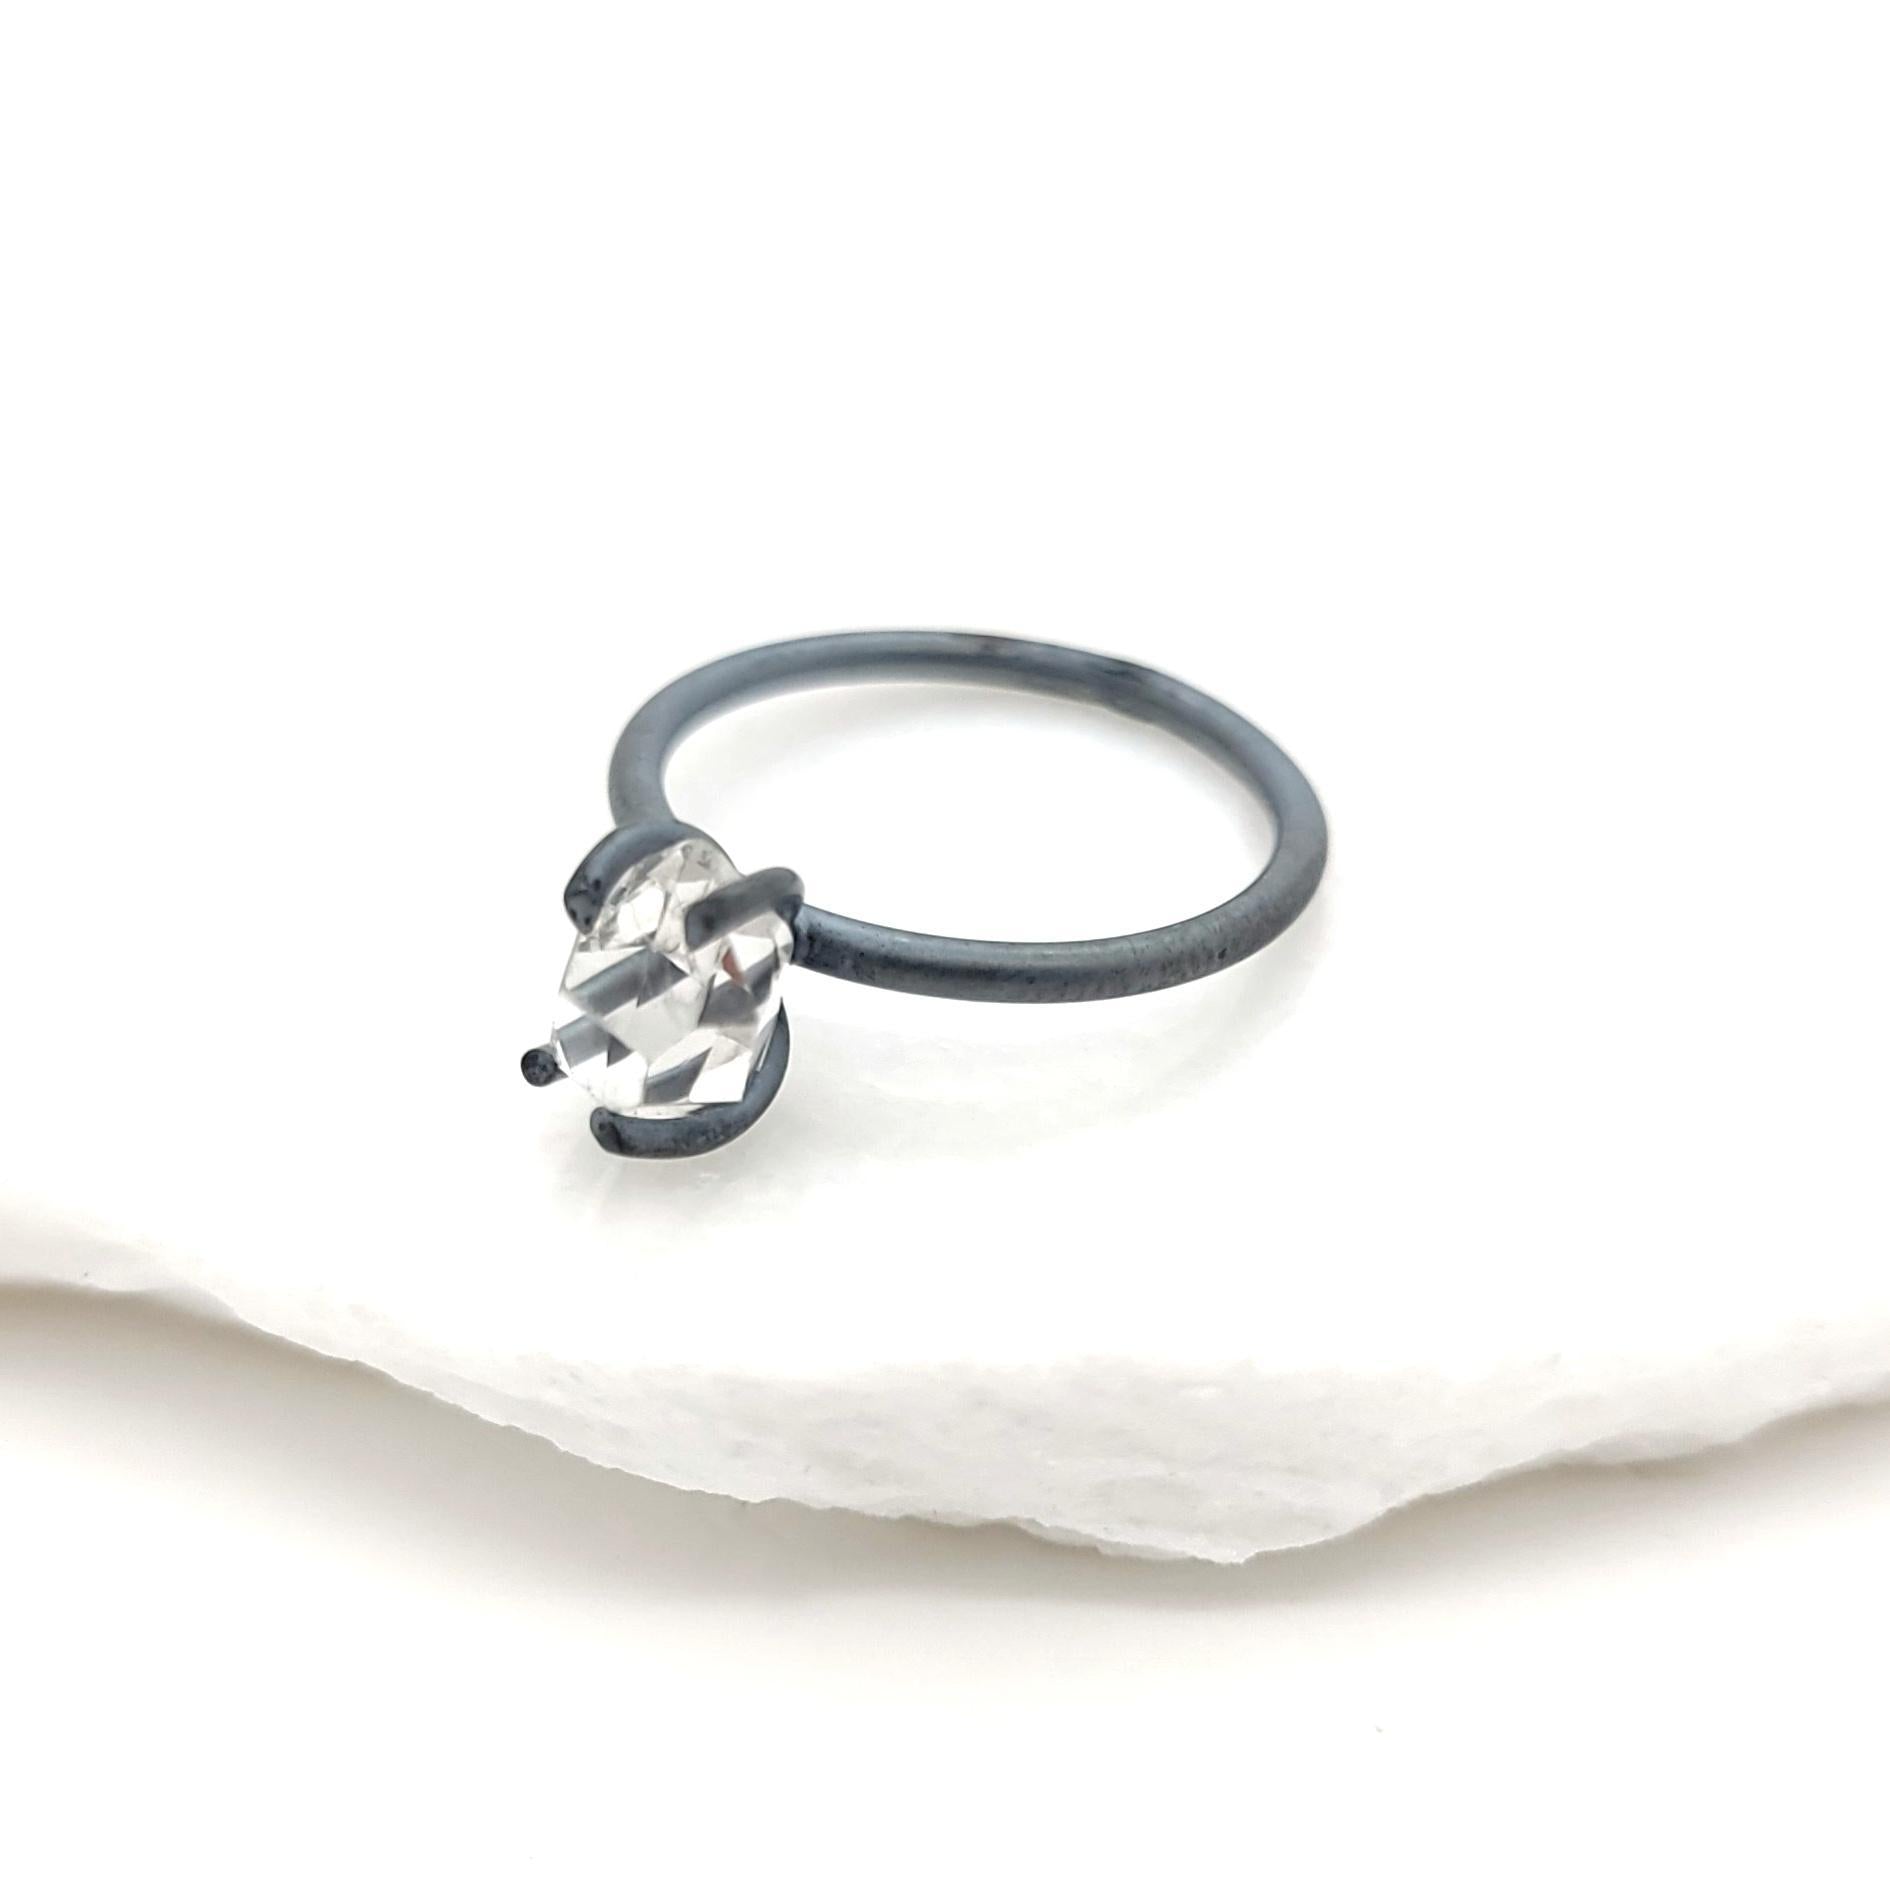 Ring - Size 6,7,8 (Custom Sizing Available) - Classic Vertical Herkimer in Oxidized Sterling Silver by Stórica Studio